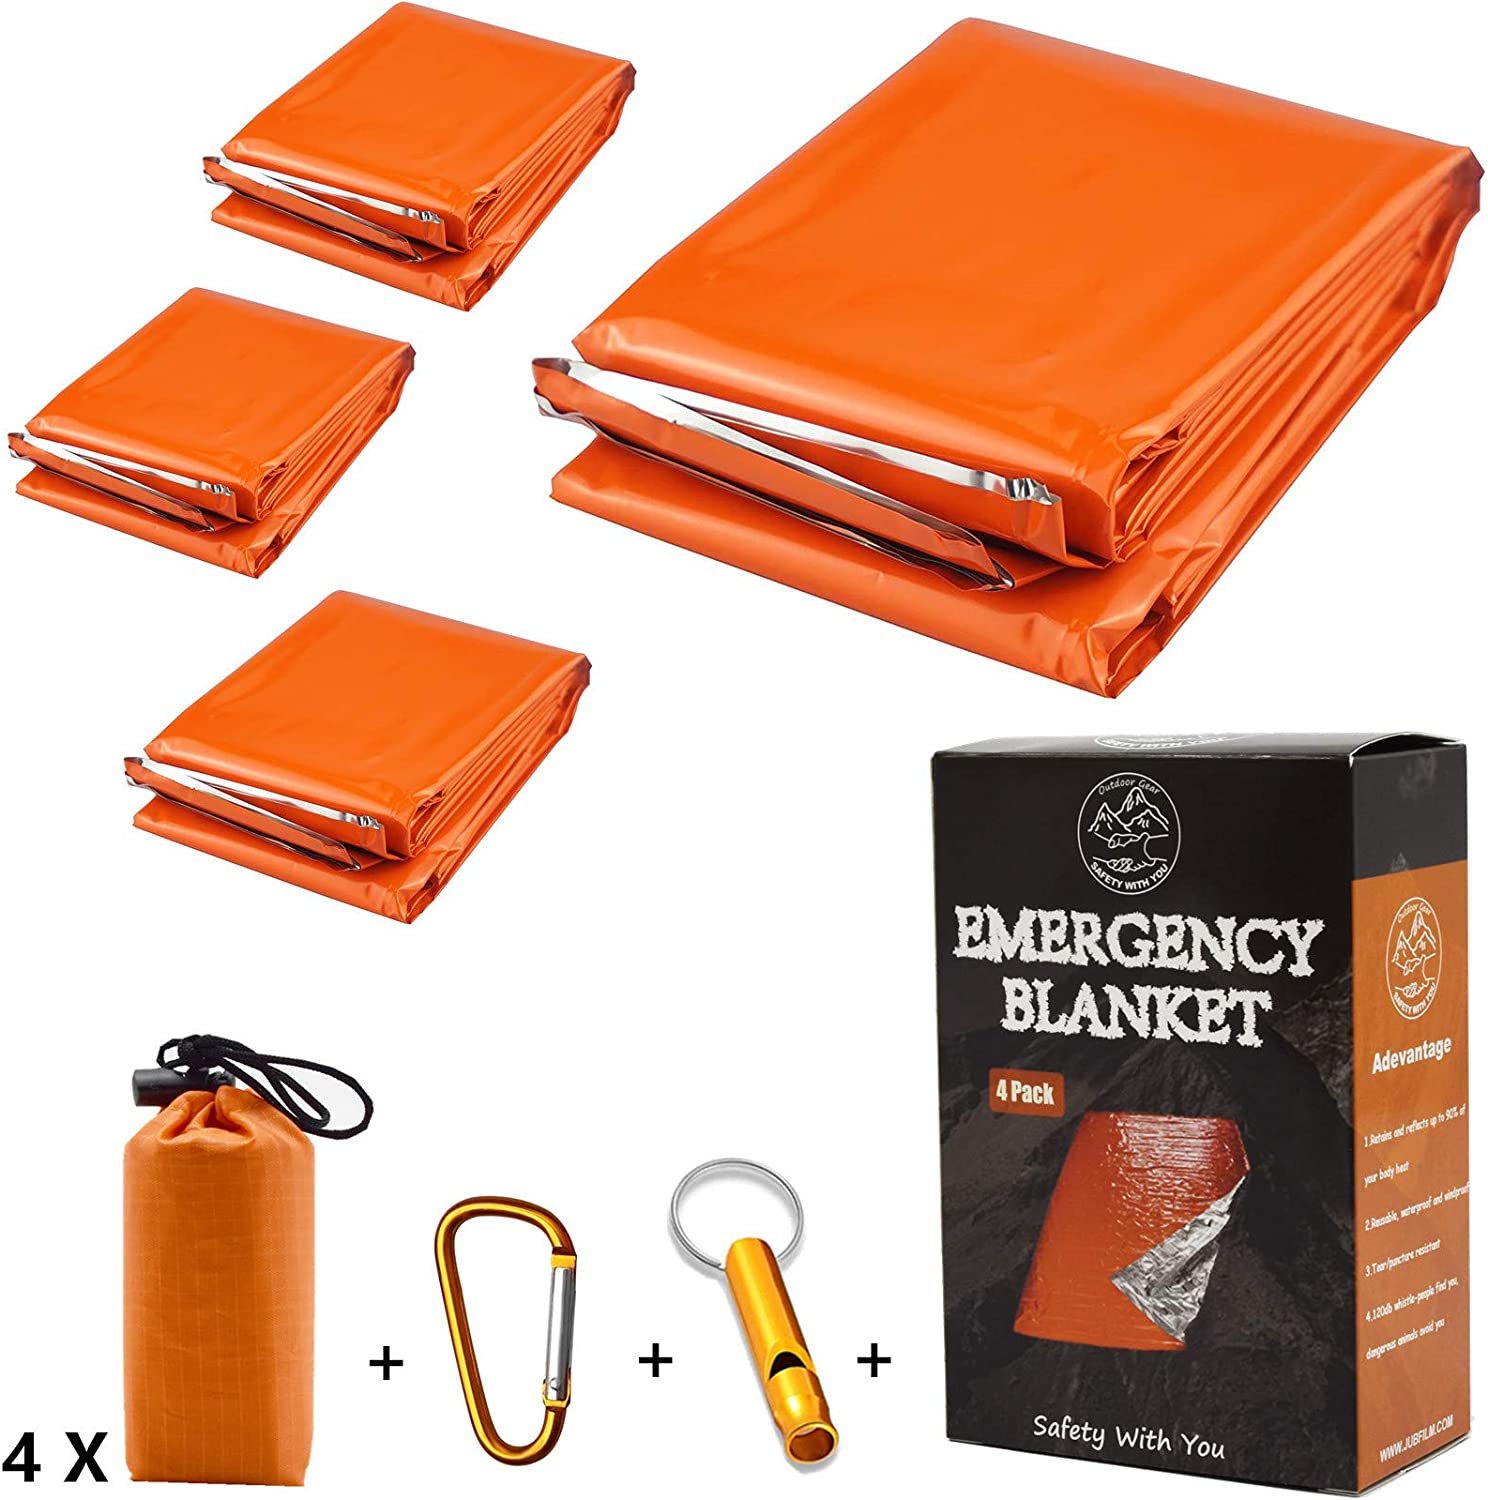 Emergency Blankets, 4 Pack Extra Large Thermal Mylar Foil Space Blanket Heat Sheets for Hiking, Outdoors, Survival, First Aid (Orange)